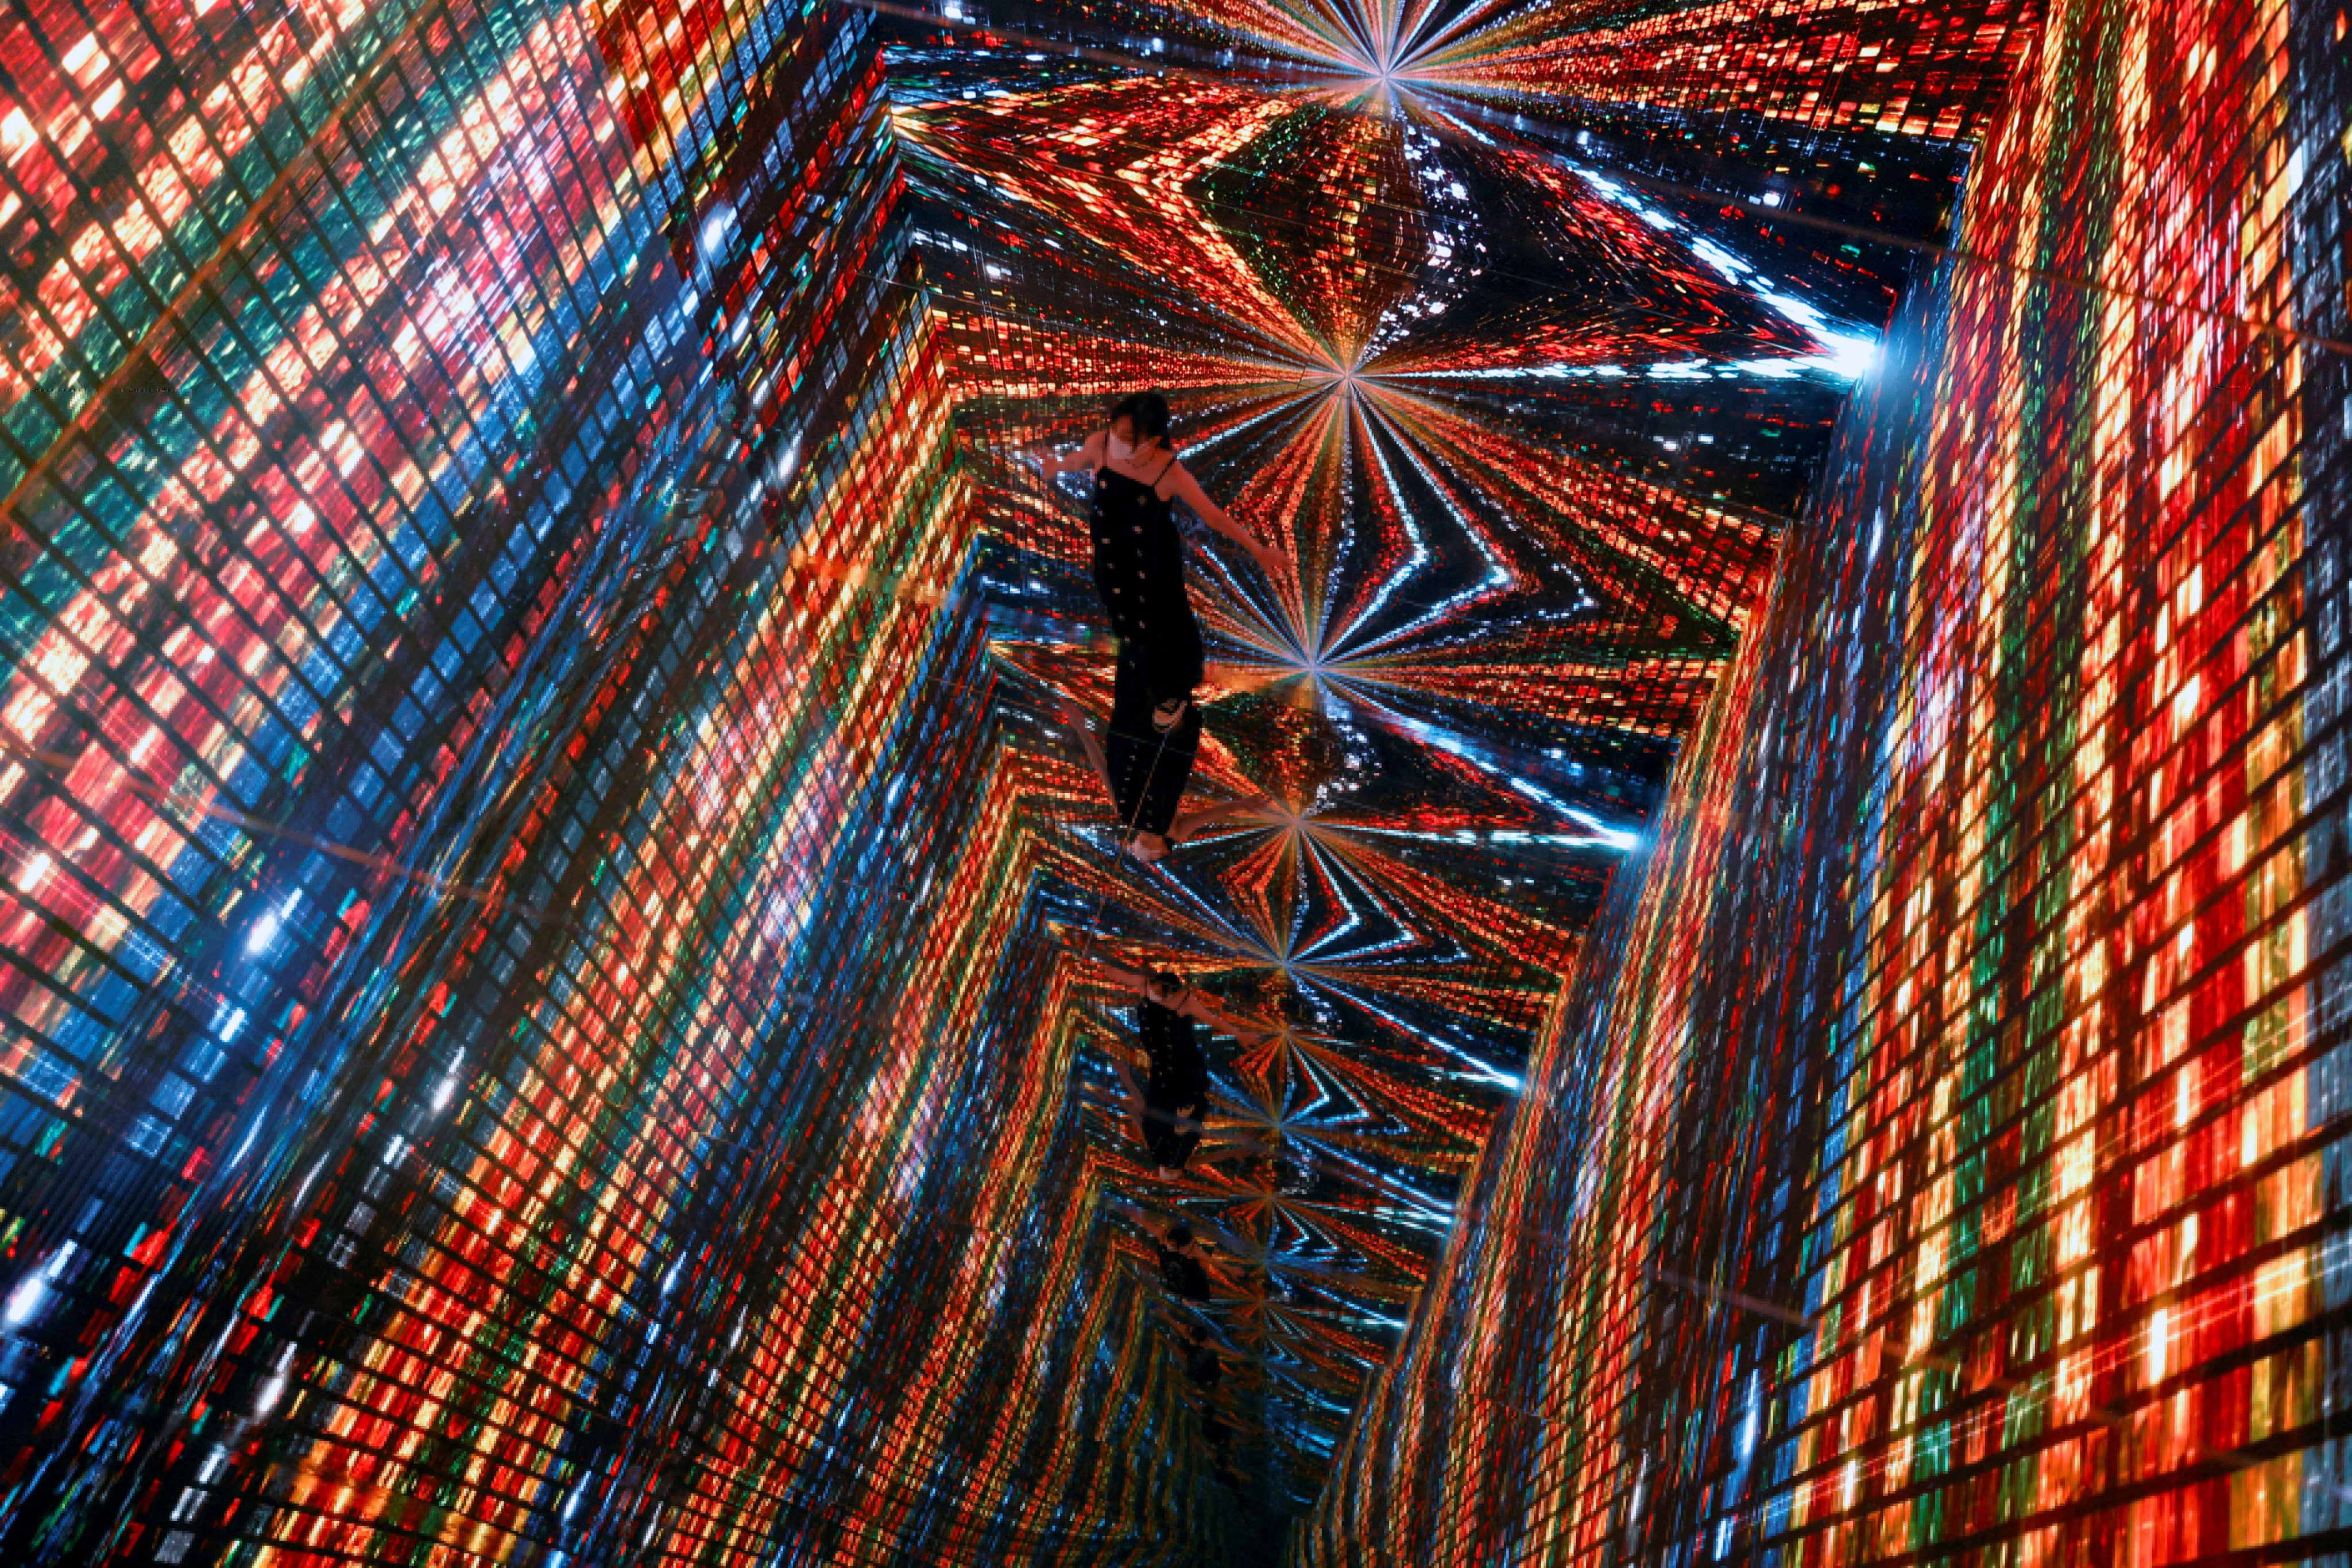 A visitor is pictured in front of an immersive art installation titled “Machine Hallucinations â Space: Metaverse” by media artist Refik Anadol, which will be converted into NFT and auctioned online at Sotheby’s, at the Digital Art Fair, in Hong Kong, China September 30, 2021. 

Photo: Reuters/Tyrone Siu